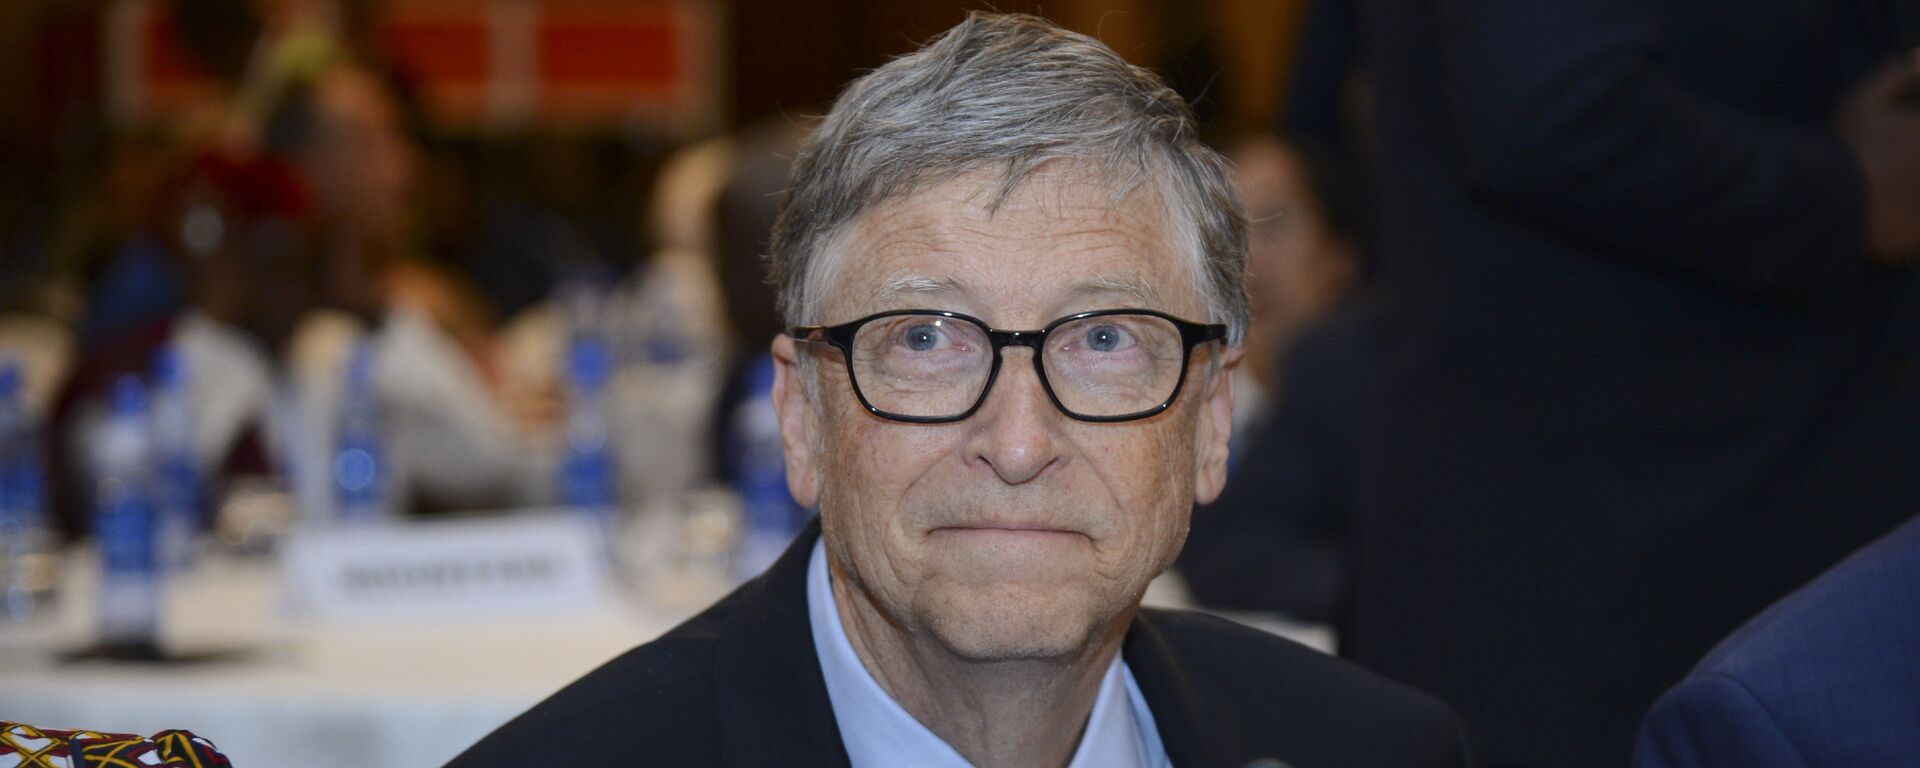 Bill Gates, chairman of the Bill & Melinda Gates Foundation, attends the Africa Leadership Meeting - Investing in Health Outcomes held at a hotel in Addis Ababa, Ethiopia, 9 February 2019.  - Sputnik International, 1920, 16.01.2021